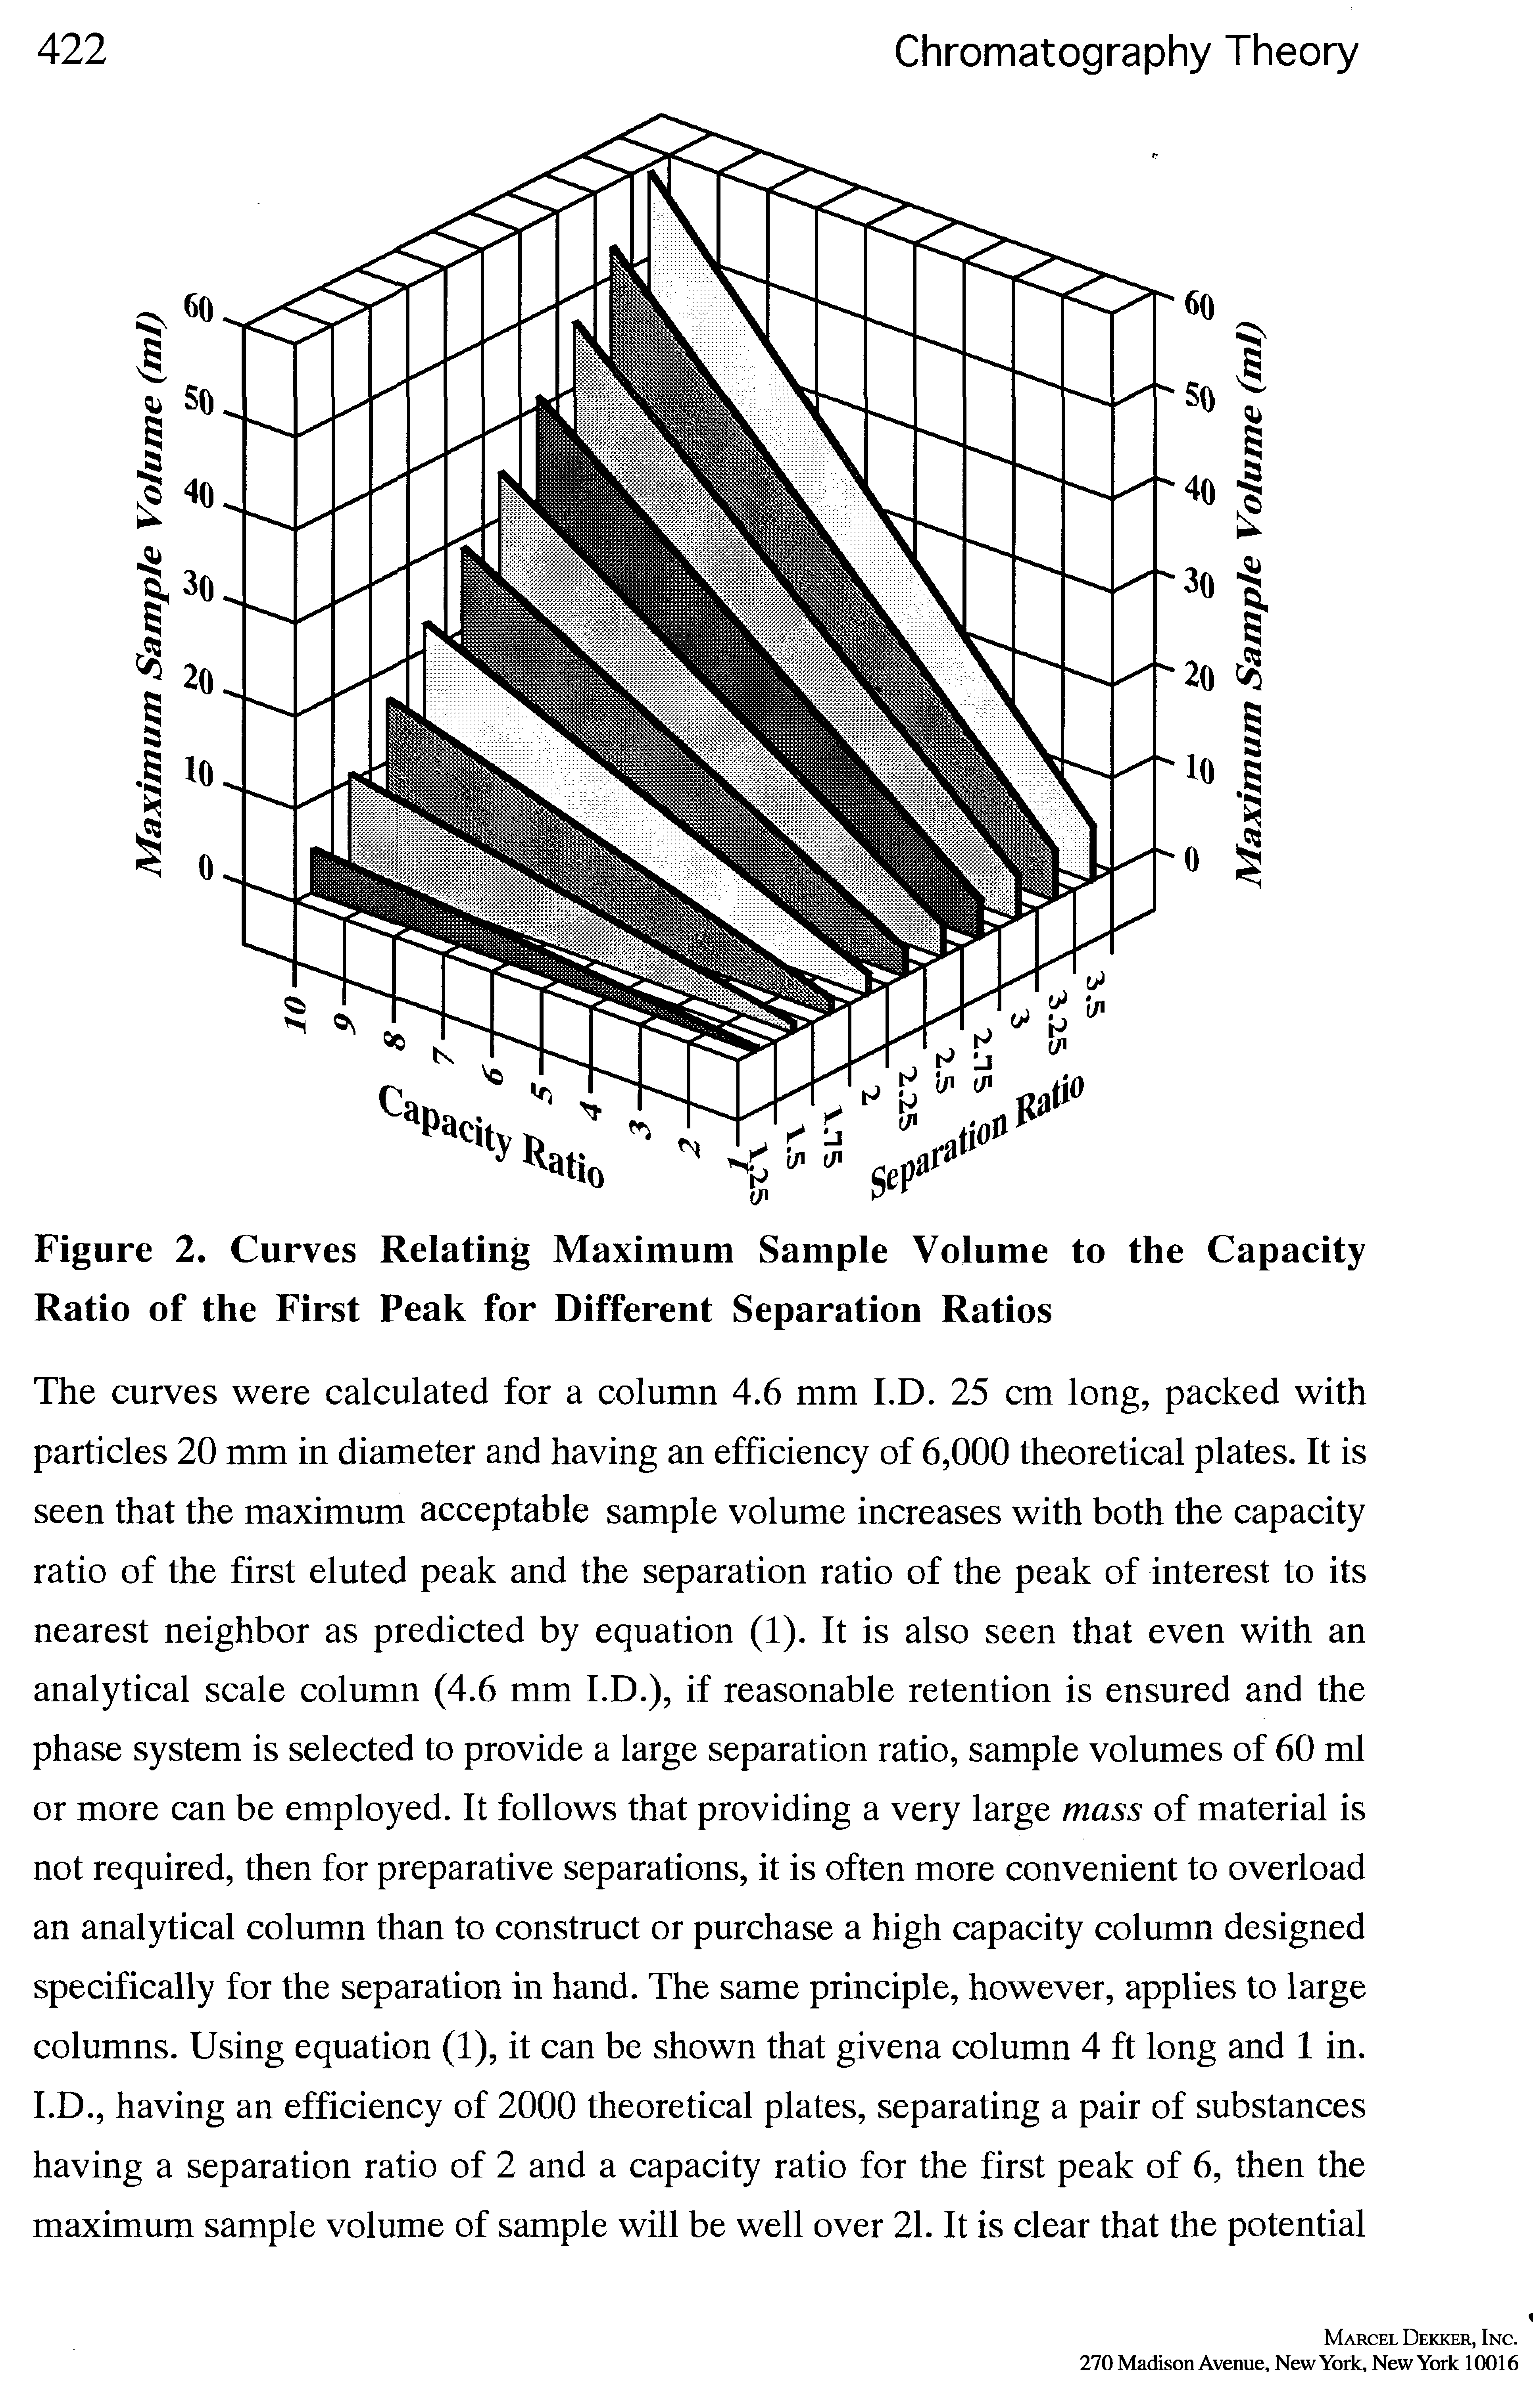 Figure 2. Curves Relating Maximum Sample Volume to the Capacity Ratio of the First Peak for Different Separation Ratios...